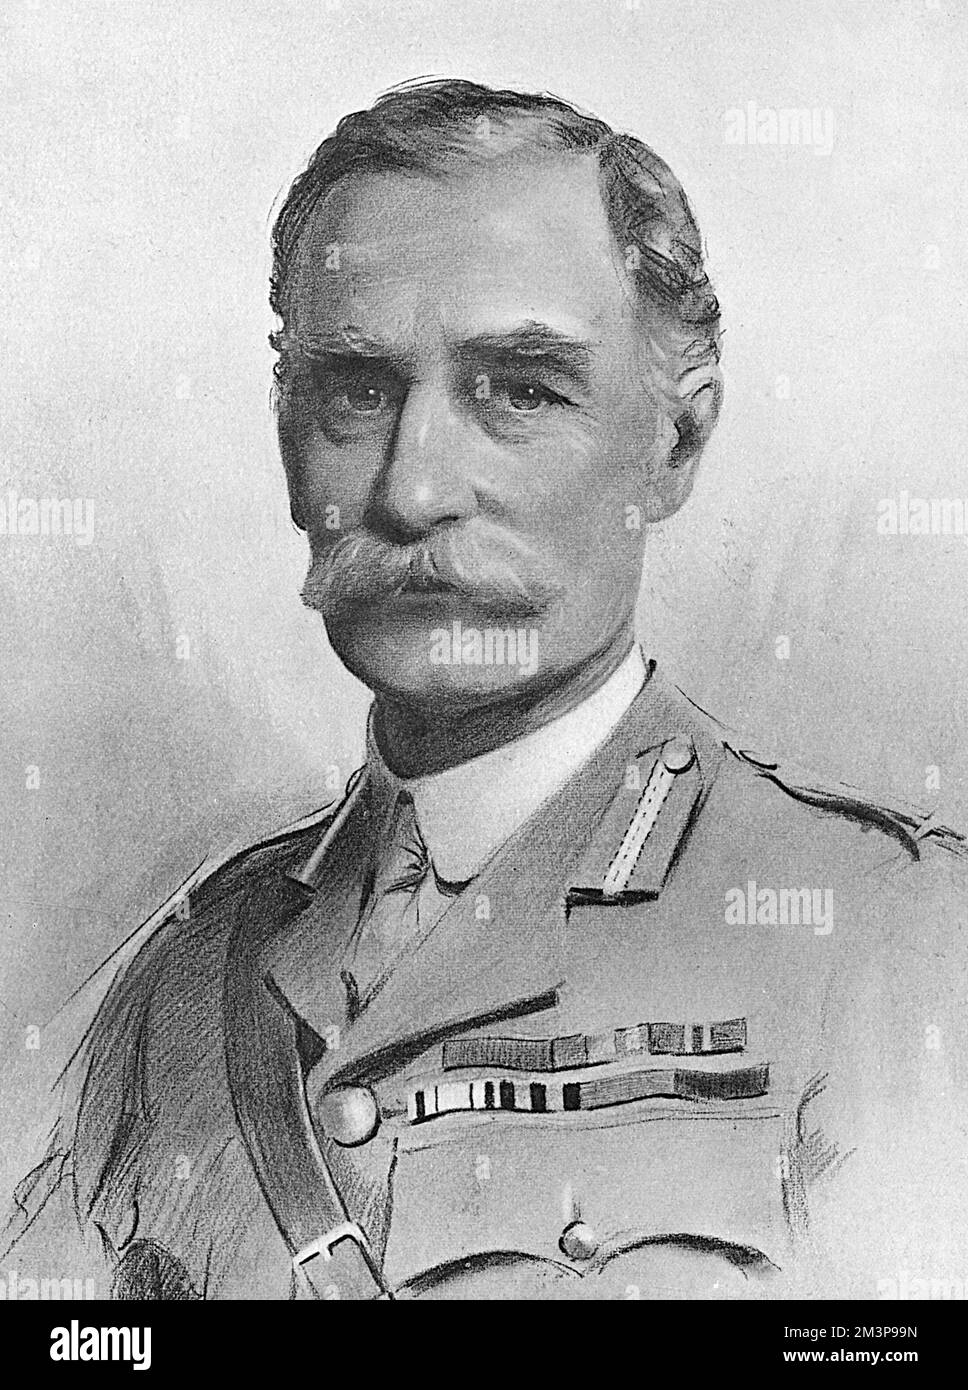 Major-General Sir John Steevens, KCB, KCMG (1855-1925), British Army Director of Equipment and Ordnance Stores during the First World War.  He war service dated back to the Zulu War of 1879 and the Egyptian Campaign of 1882.  After just thirteen year's service he reached the rank of lieutenant-colonel and eleven years later became Principal Ordnance Officer at Woolwich, an appointment he held throughout the Boer War (1899-1902).  He held th appointment of Inspector-General of Ordnance Services, and subsequently Director of Artillery at the War Office from 1893-1898.       Date: 1917 Stock Photo